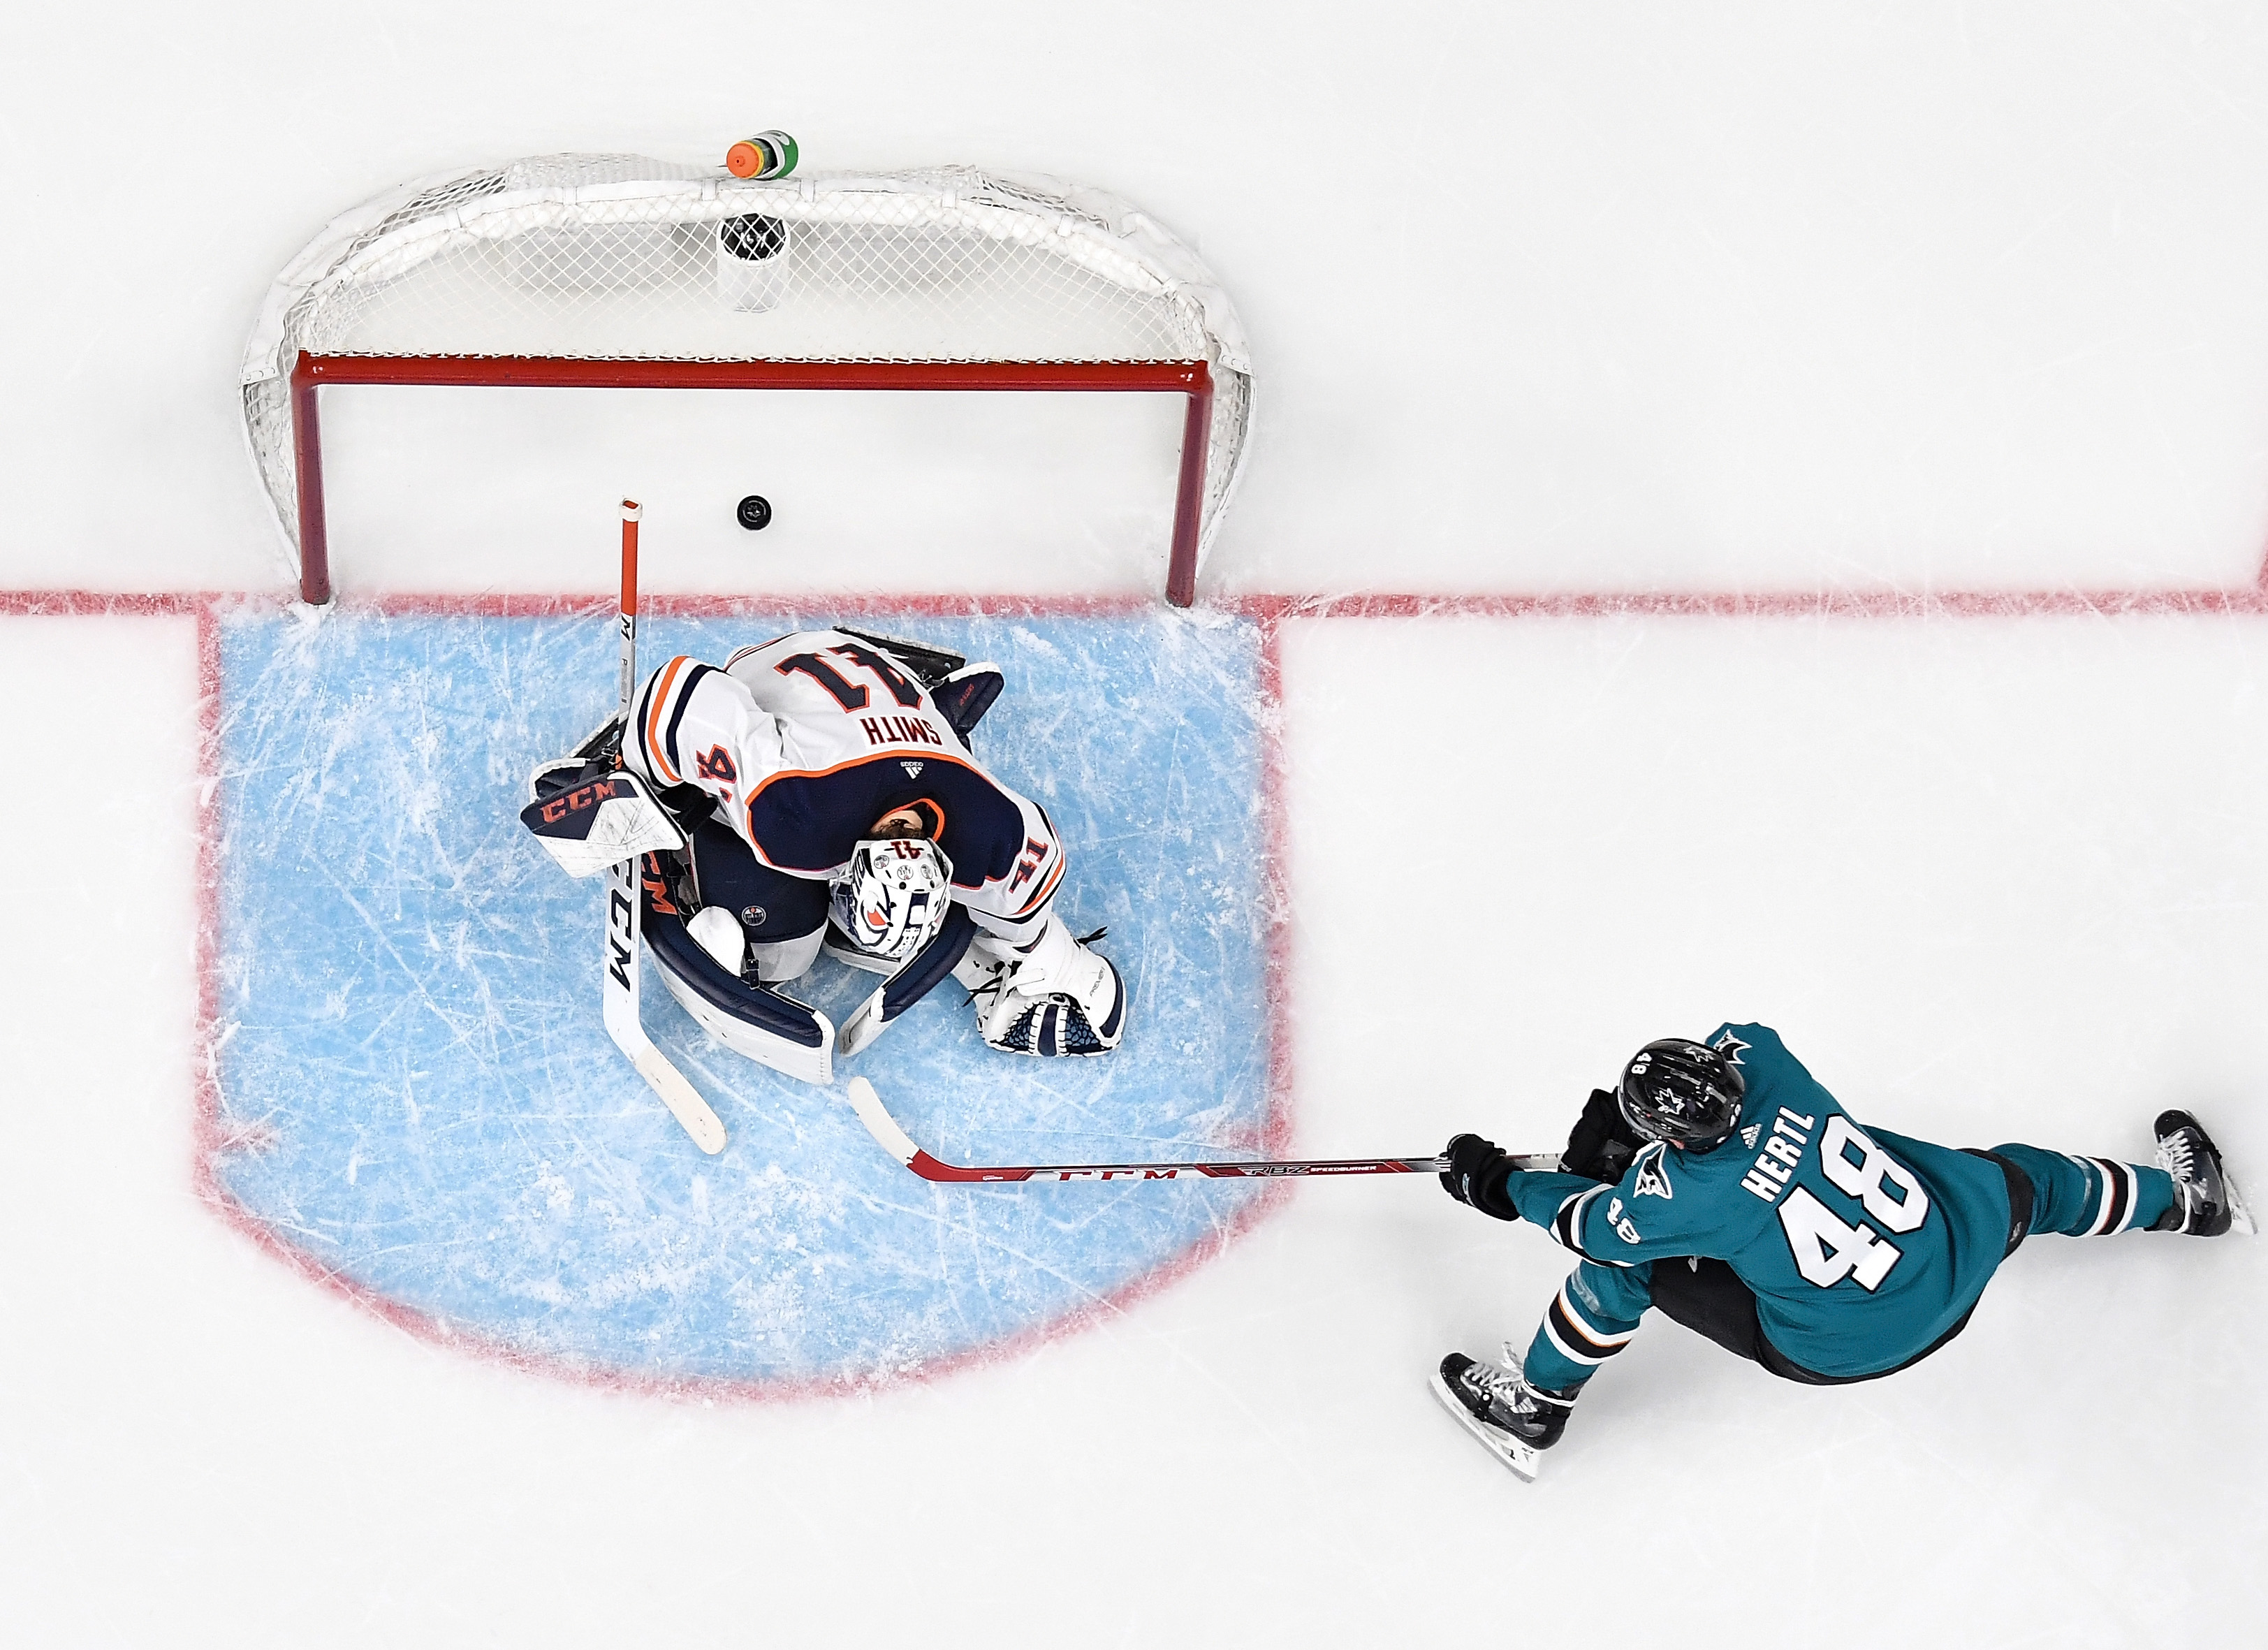 An overhead view as Tomas Hertl #48 of the San Jose Sharks scores a goal against Mike Smith #41 of the Edmonton Oilers at SAP Center on November 12, 2019 in San Jose, California.